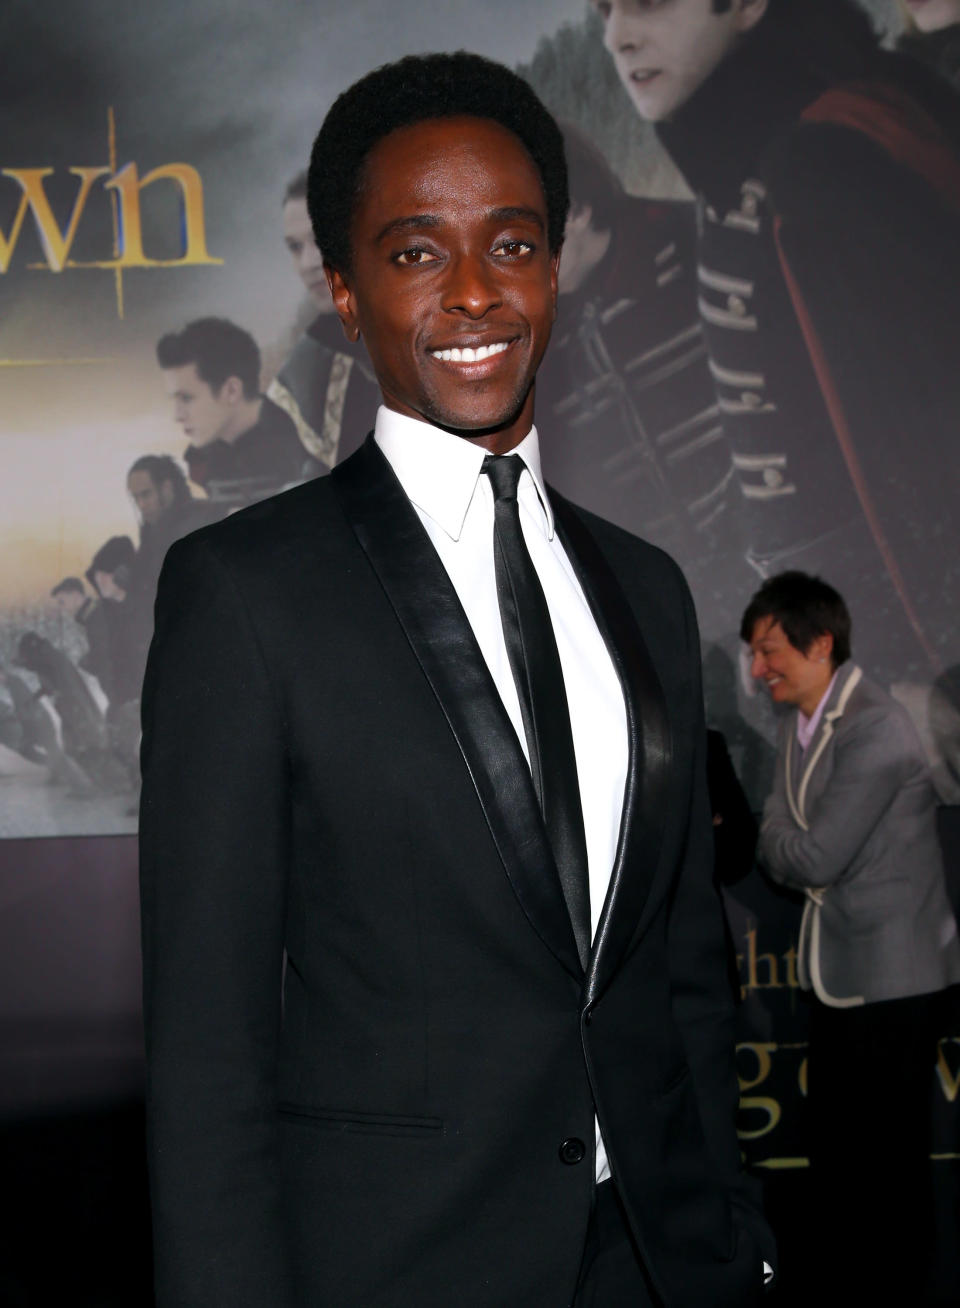 Edi Gathegi arrives at the premiere of Summit Entertainment's "The Twilight Saga: Breaking Dawn - Part 2" at Nokia Theatre L.A. Live on November 12, 2012 in Los Angeles, California. (Photo by Christopher Polk/Getty Images)